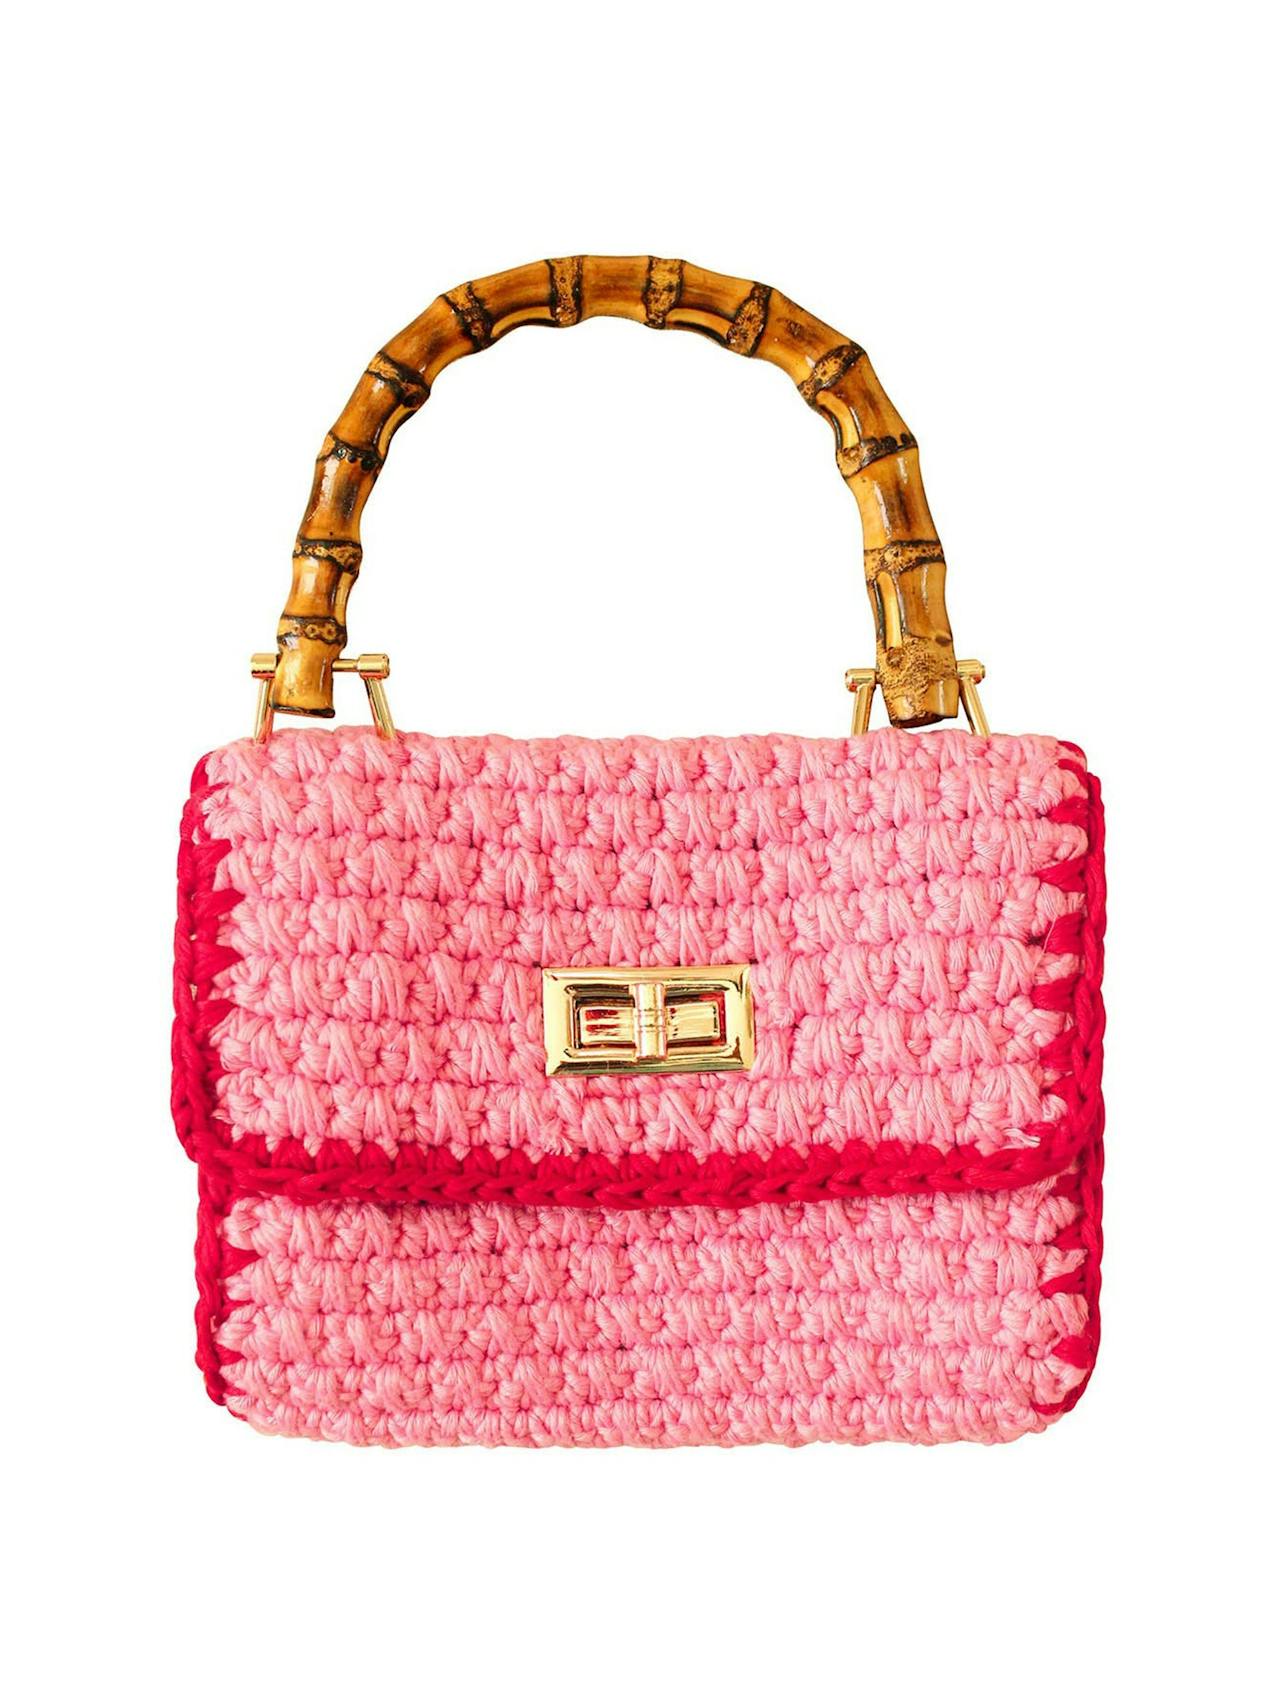 Airmail petite crochet handbag in pink and red